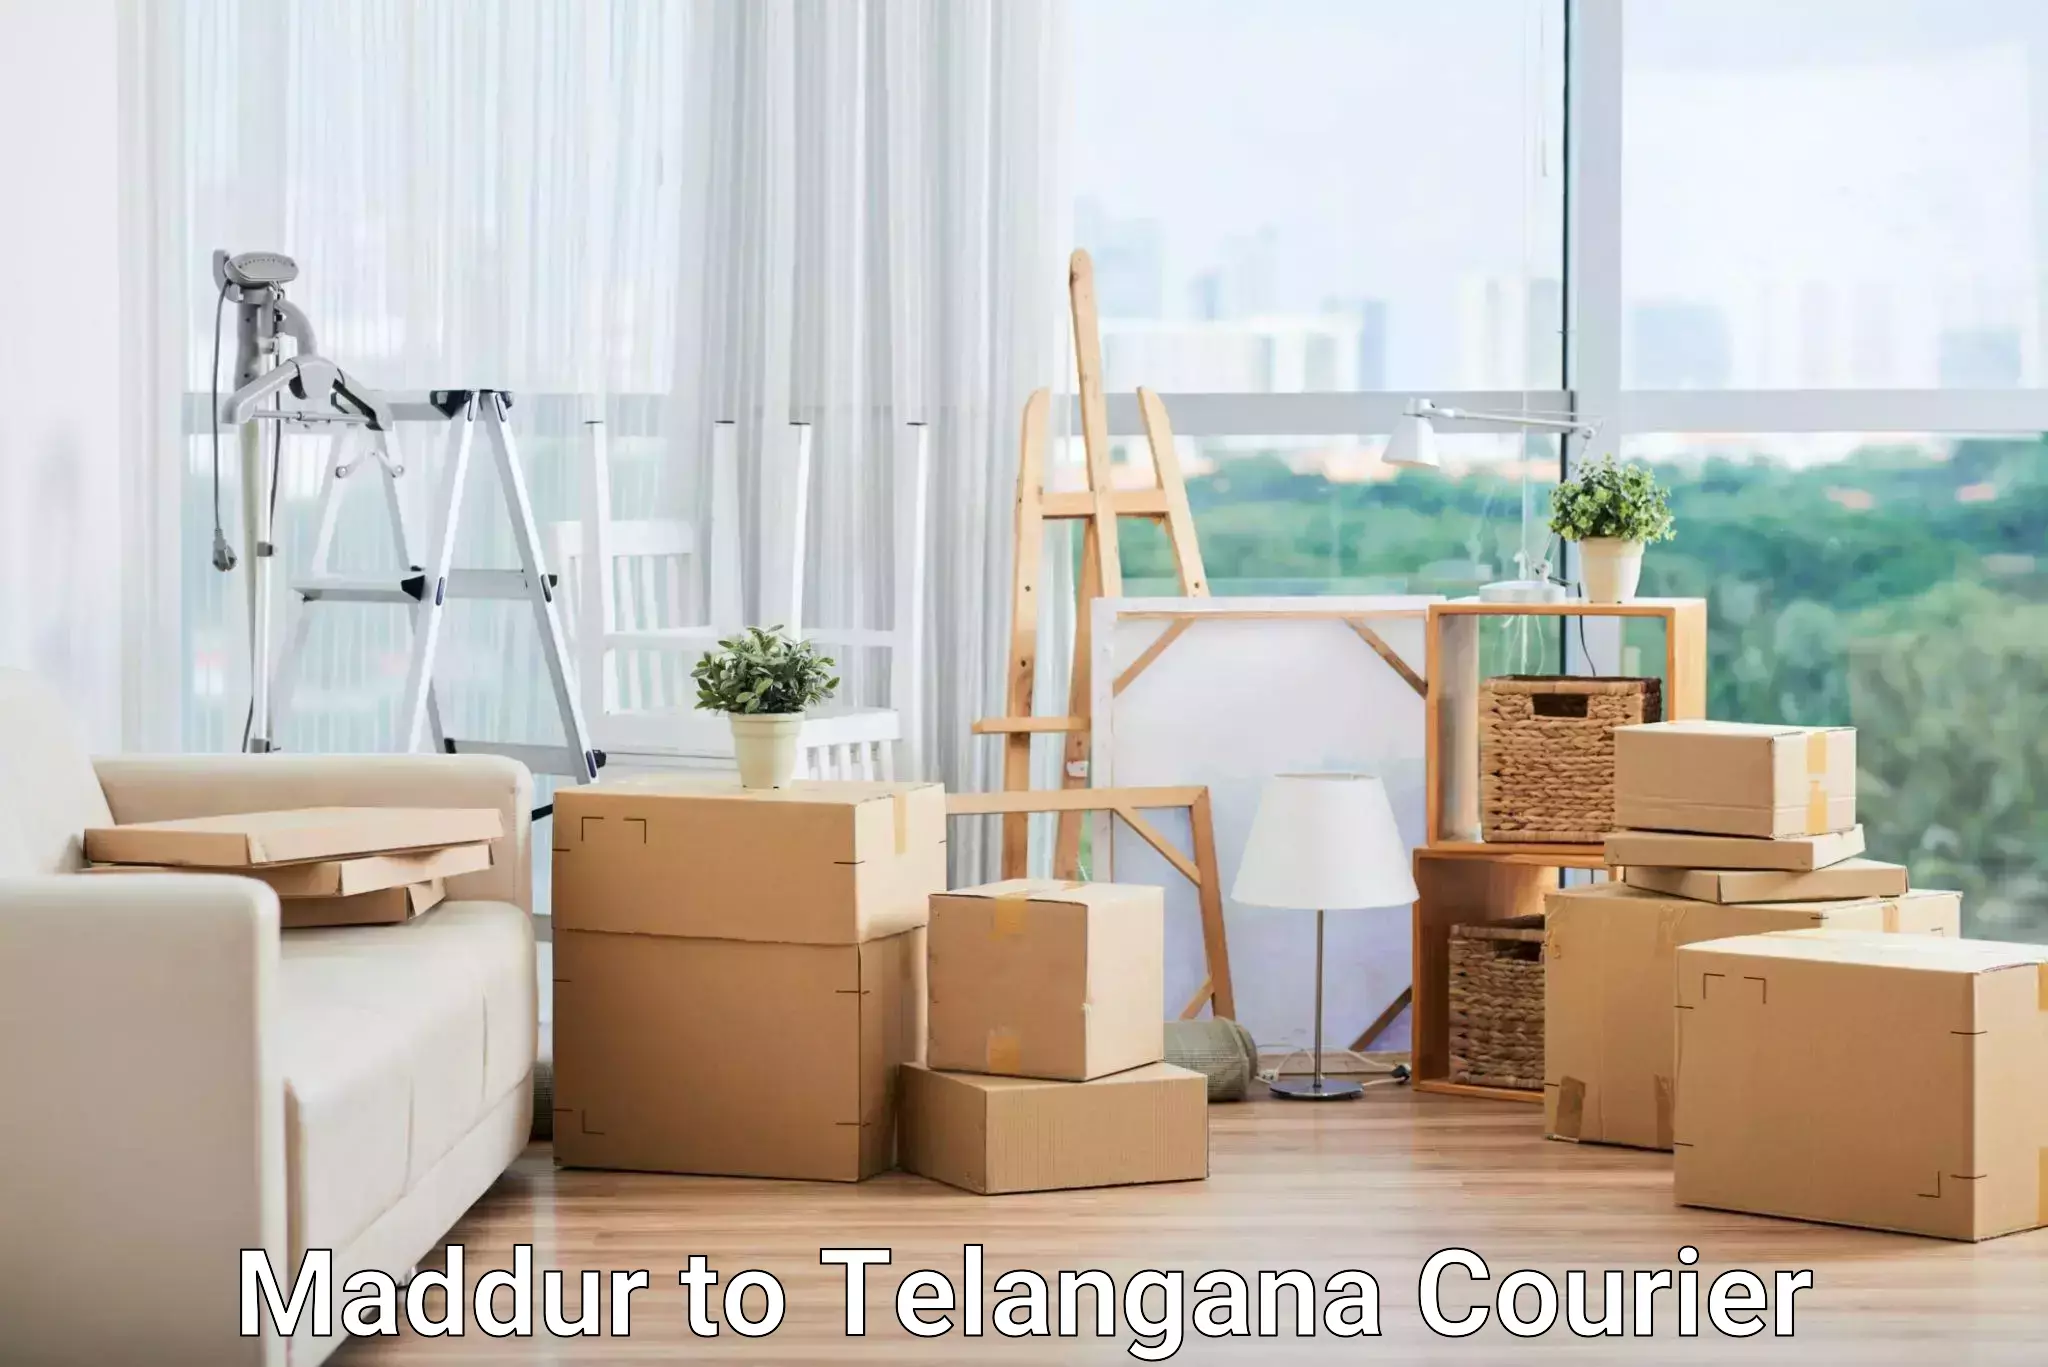 International courier networks in Maddur to Gollapalli